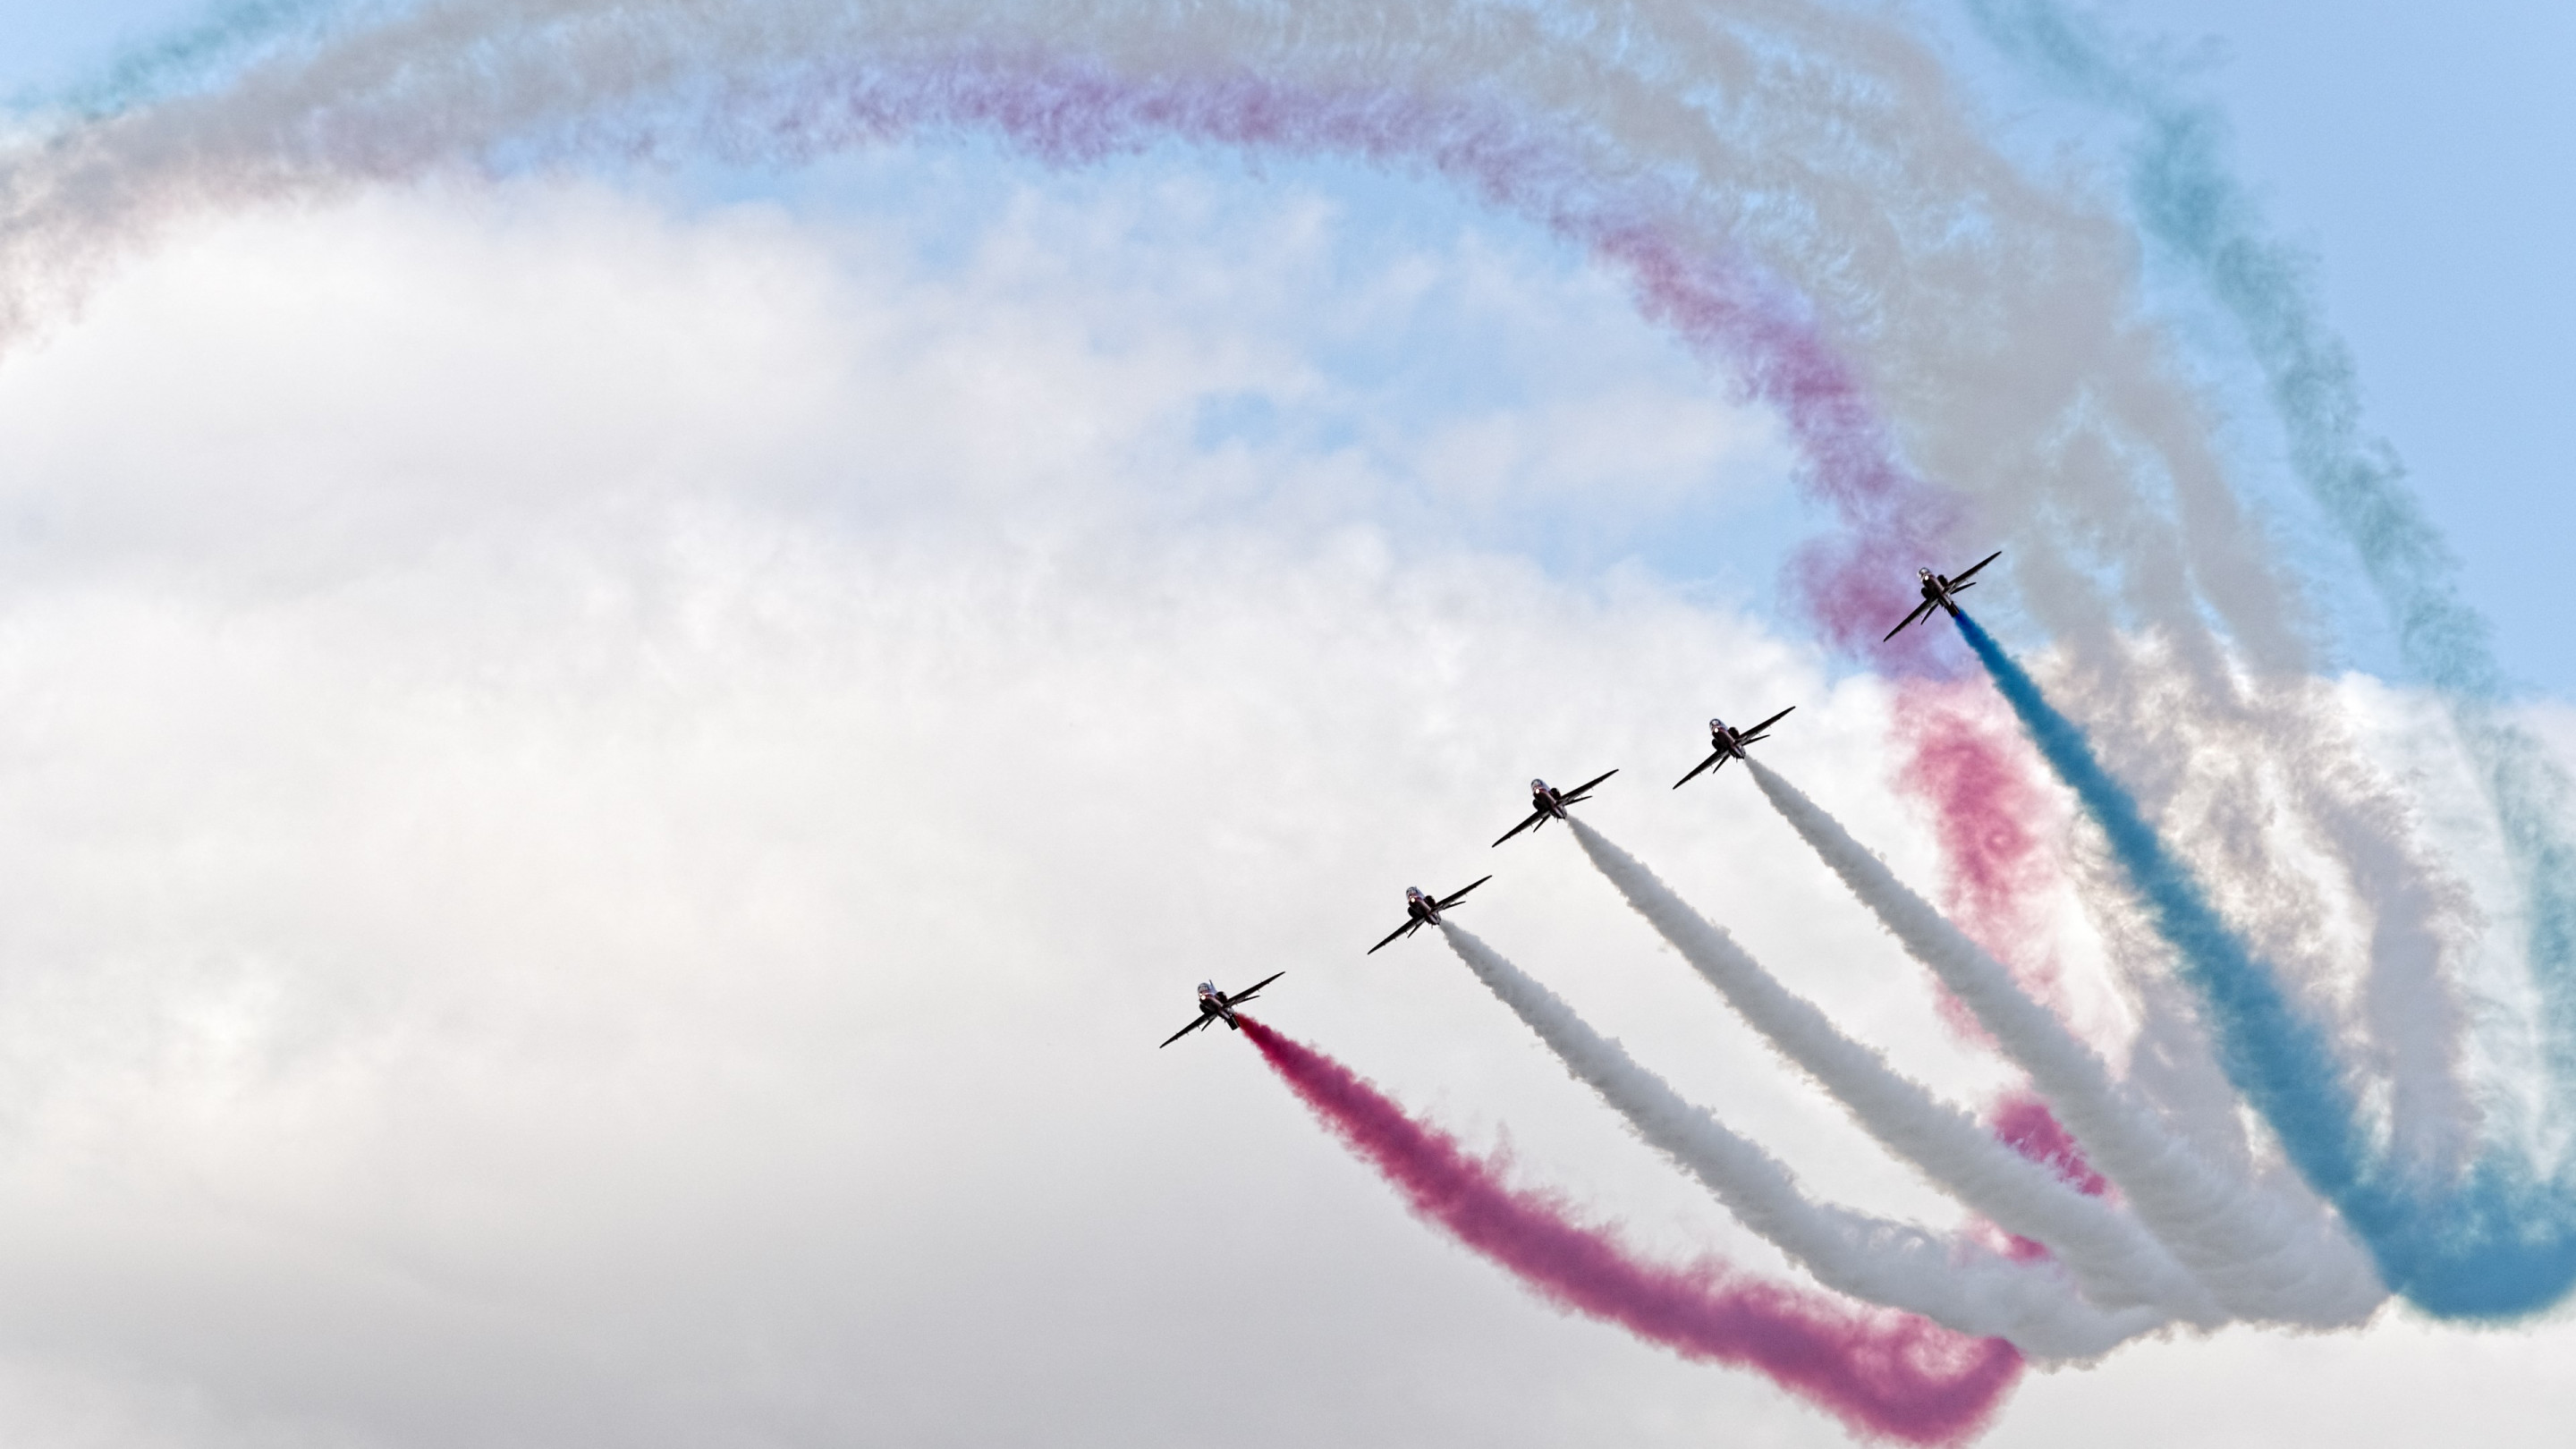 Red Arrows at Sywell Air Show wallpaper 2880x1620